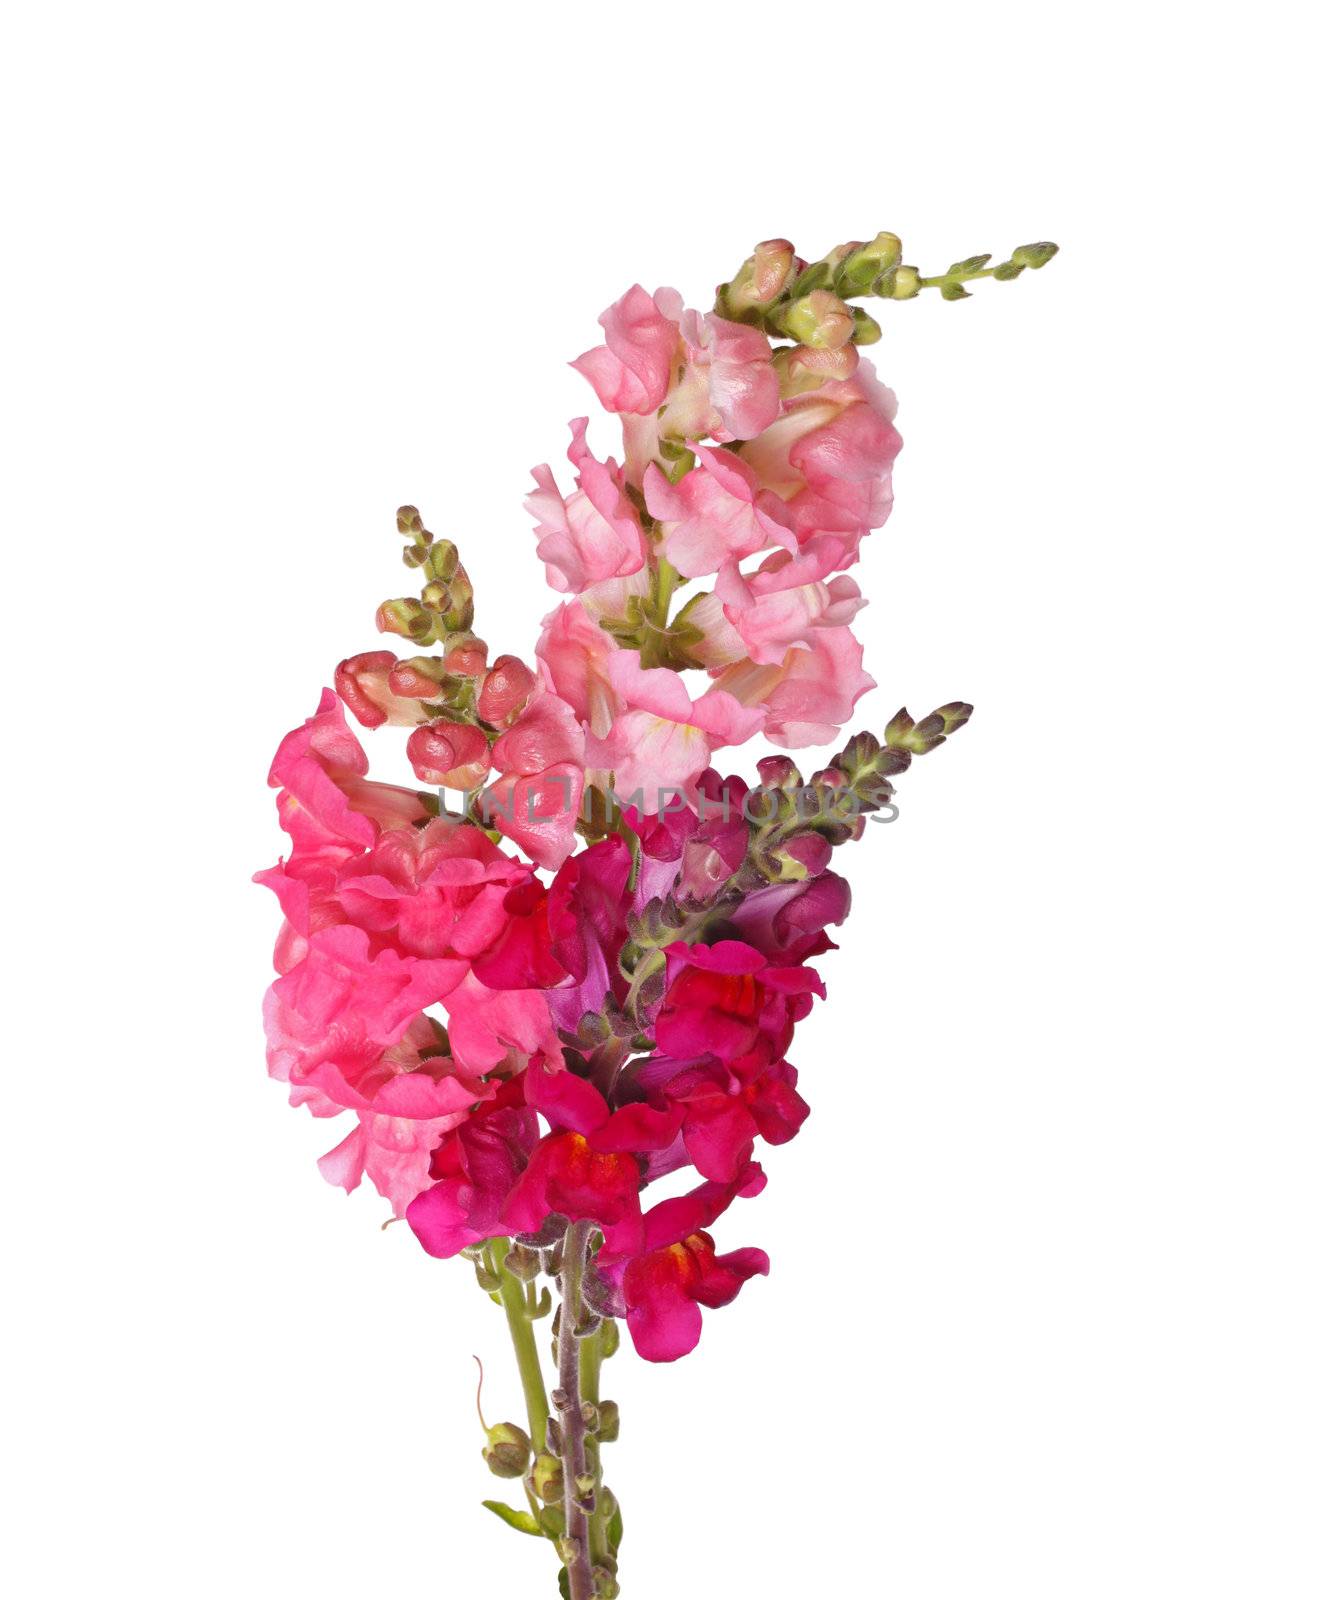 Stems of pink, red and purple shapdragon flowers isolated on whi by sgoodwin4813